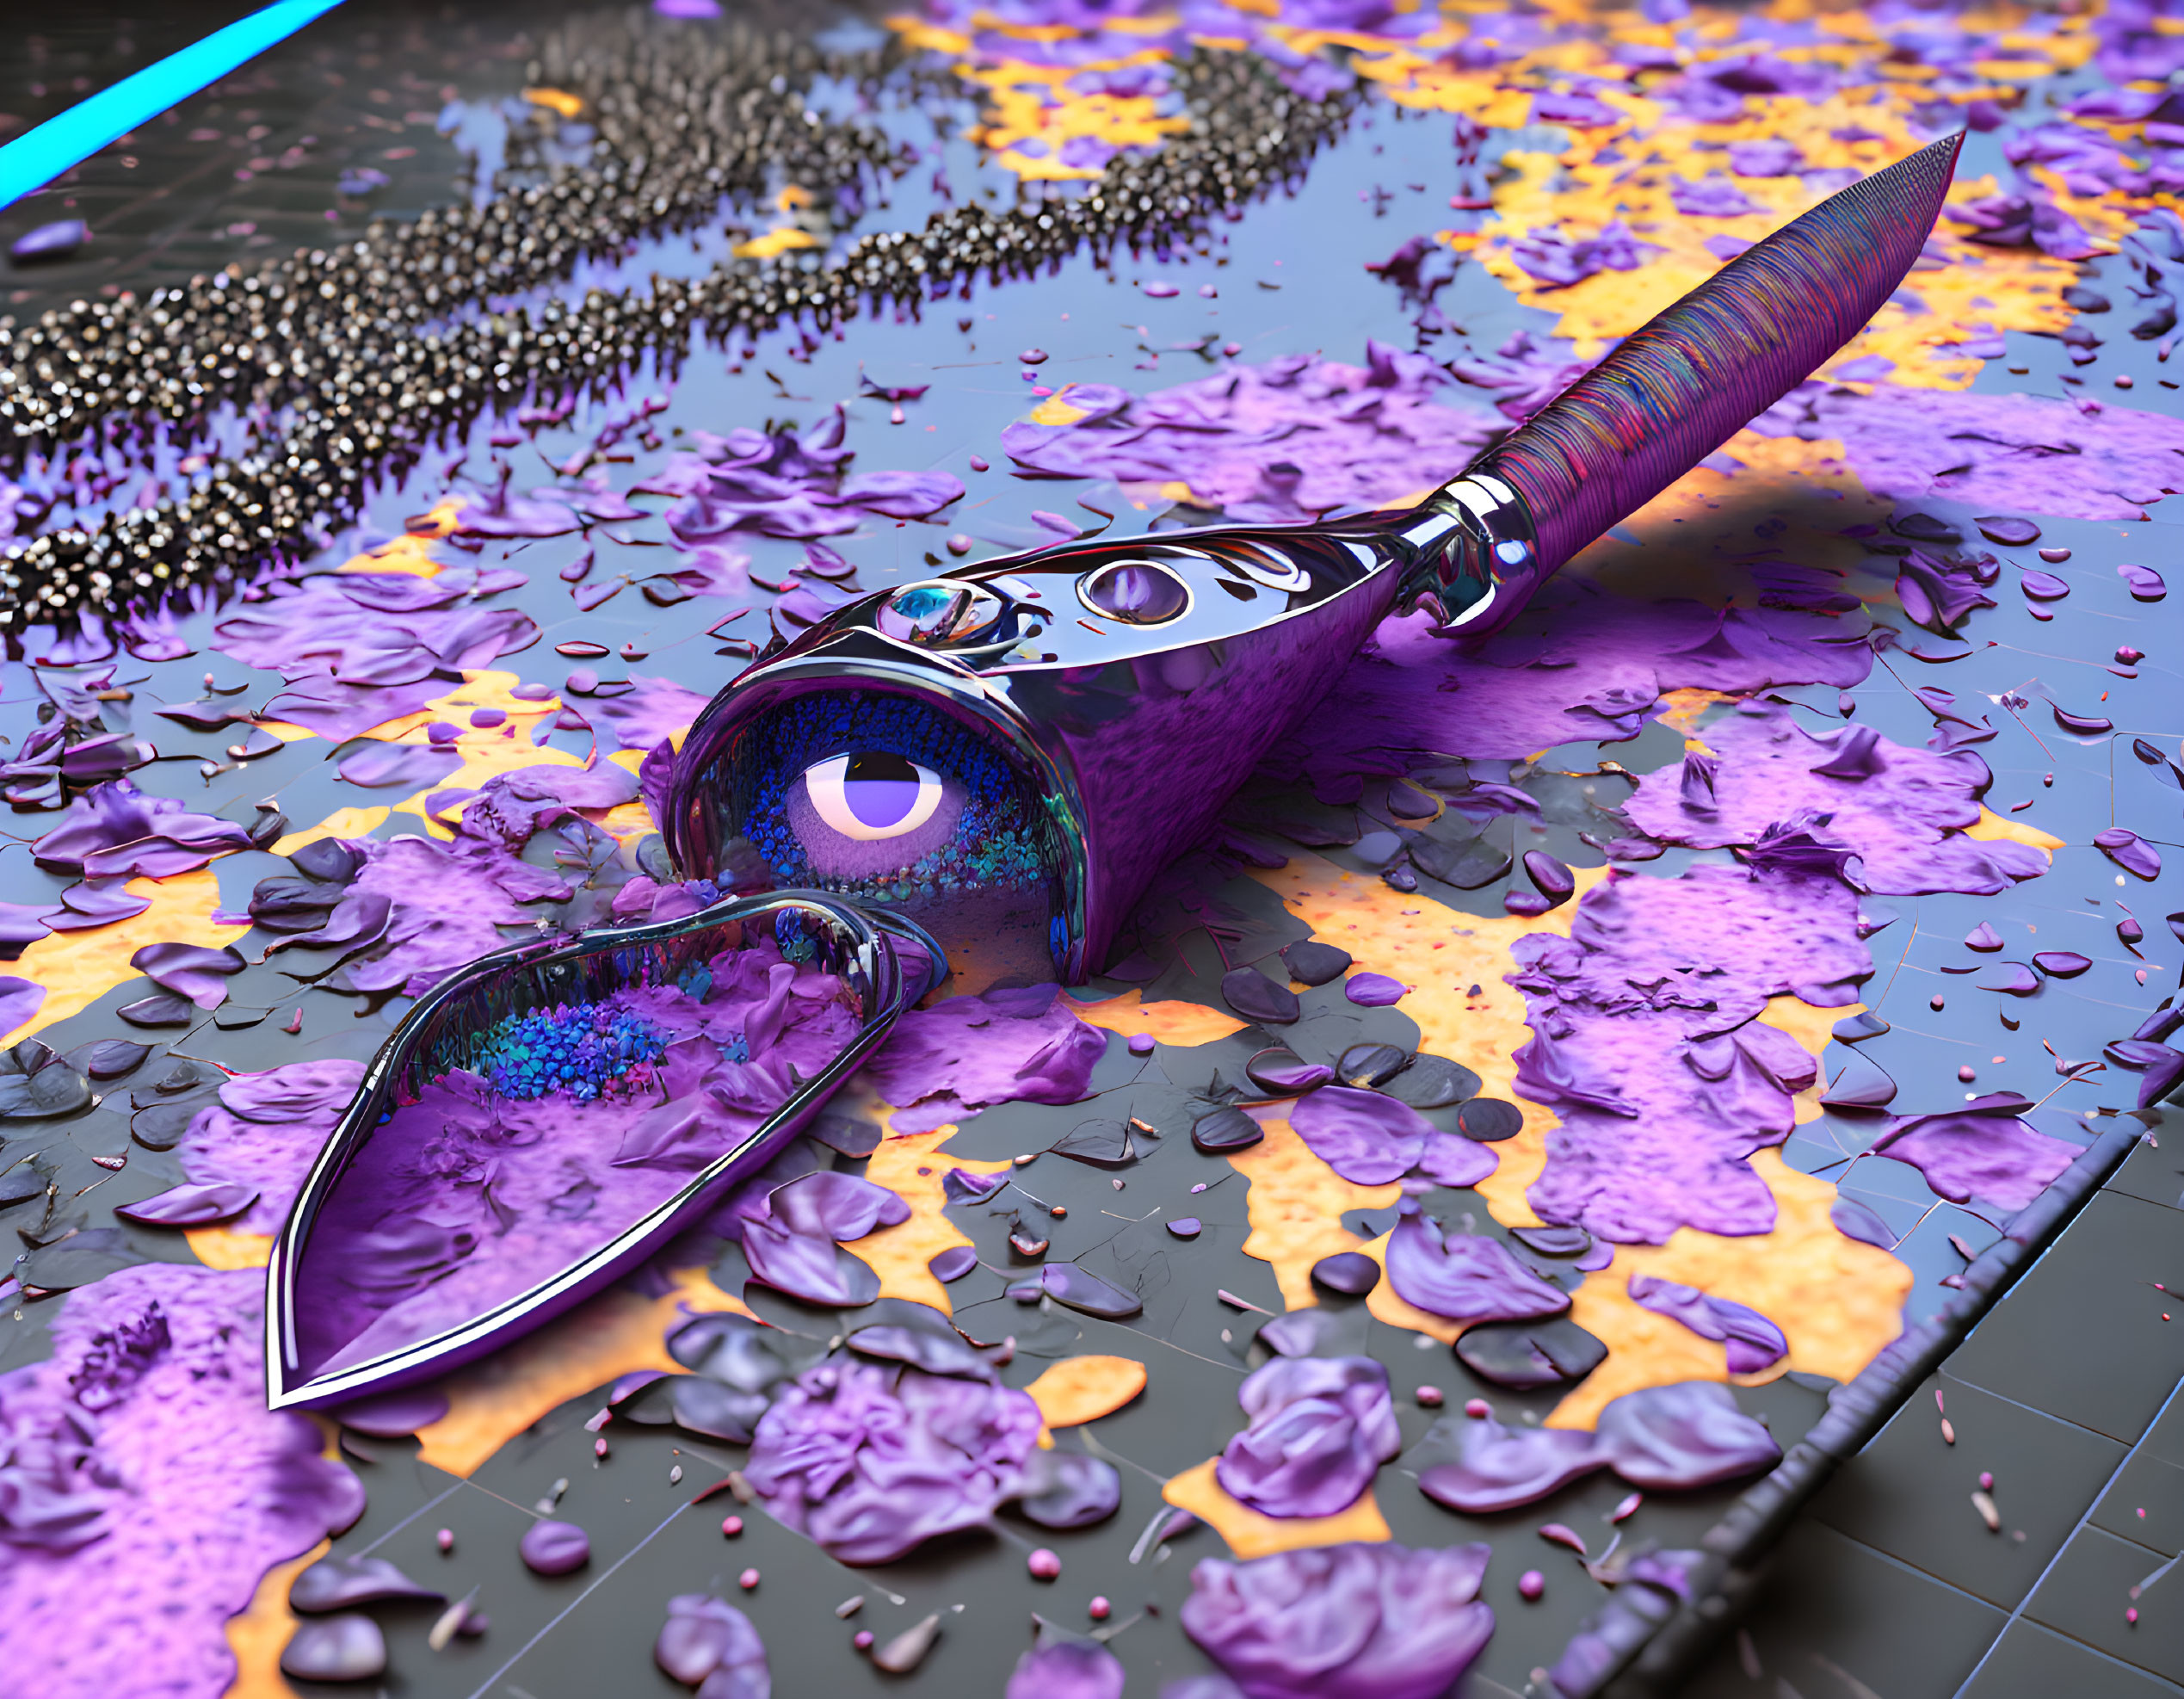 Colorful 3D Knife Render with Eye Design on Reflective Surface